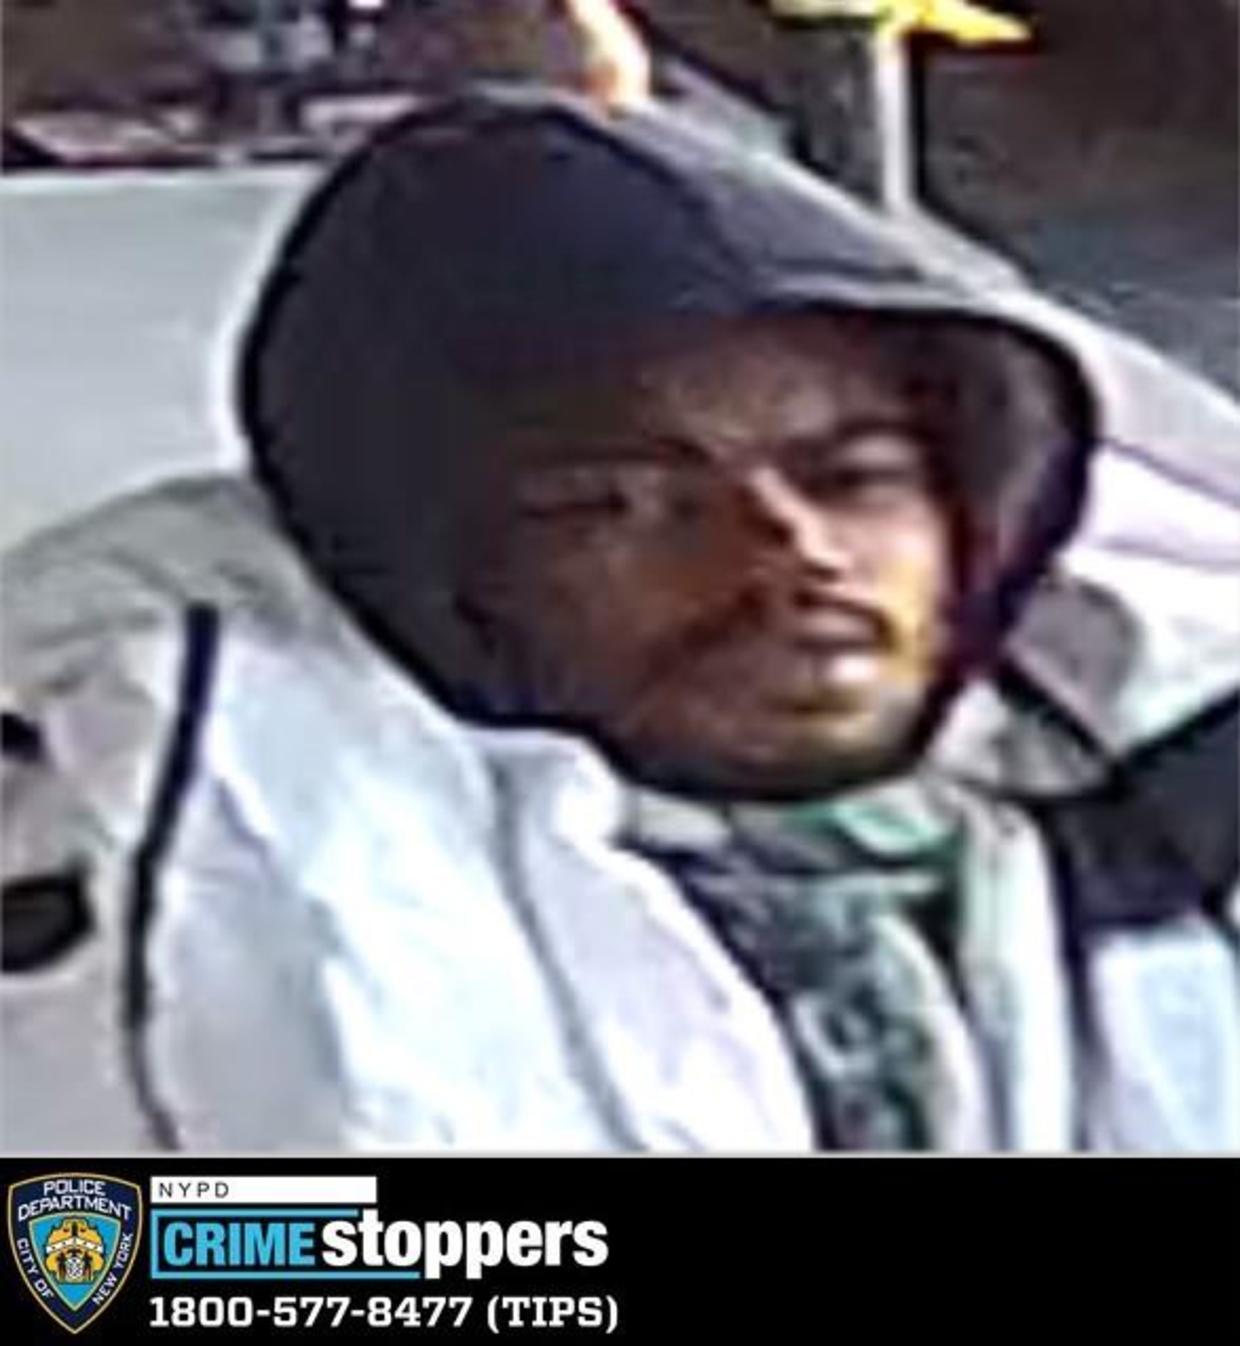 New Photos Released Of Man Wanted In Connection To Sexual Assault On Popular West Village 